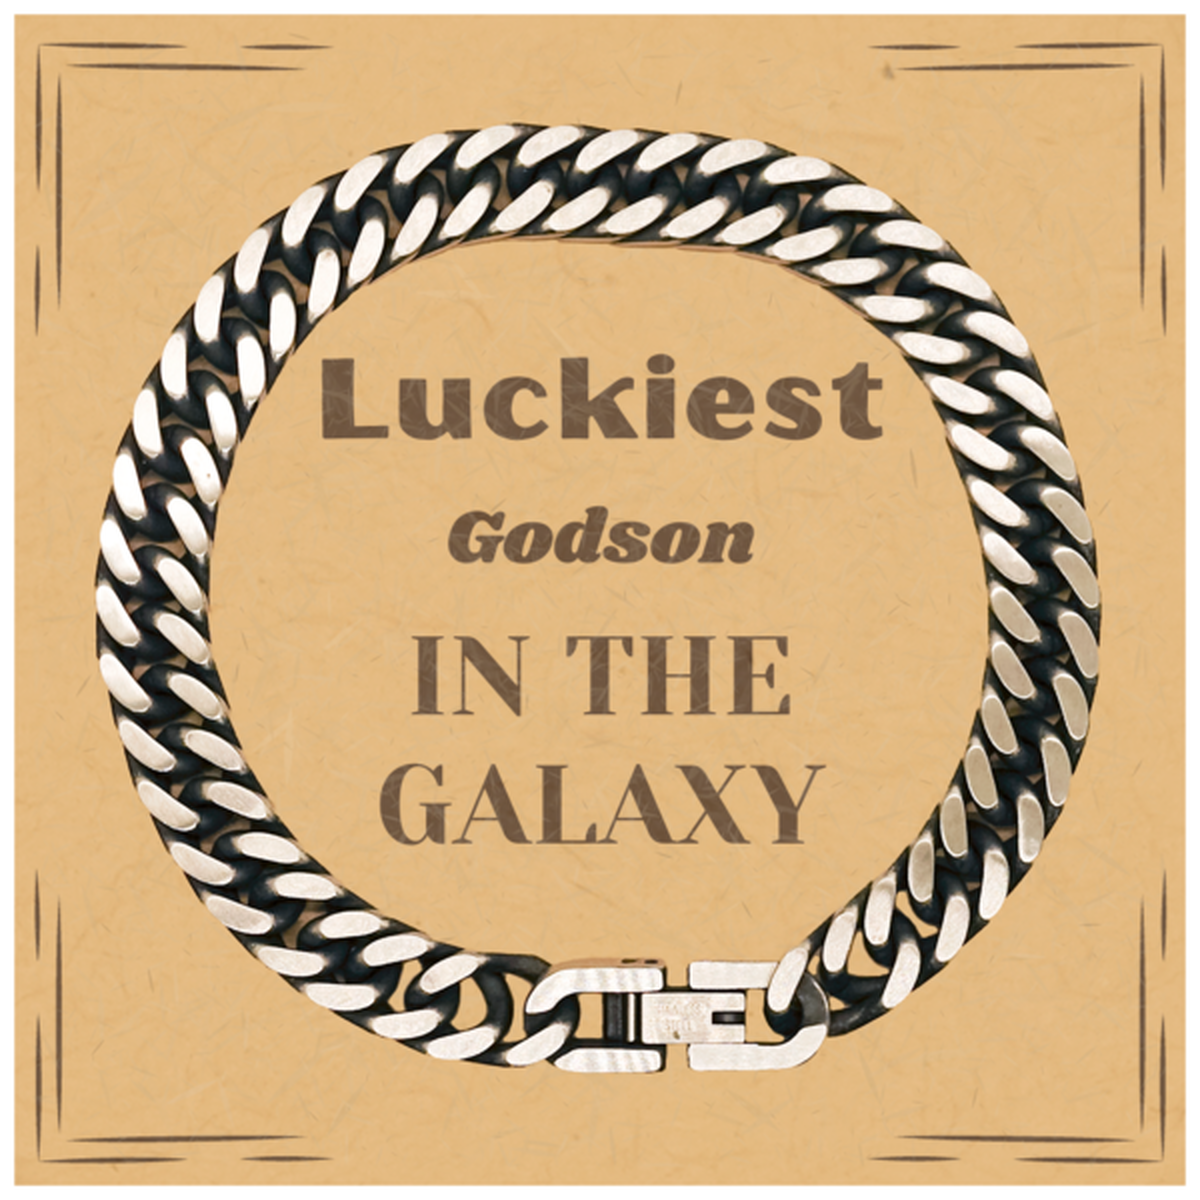 Luckiest Godson in the Galaxy, To My Godson Message Card Gifts, Christmas Godson Cuban Link Chain Bracelet Gifts, X-mas Birthday Unique Gifts For Godson Men Women